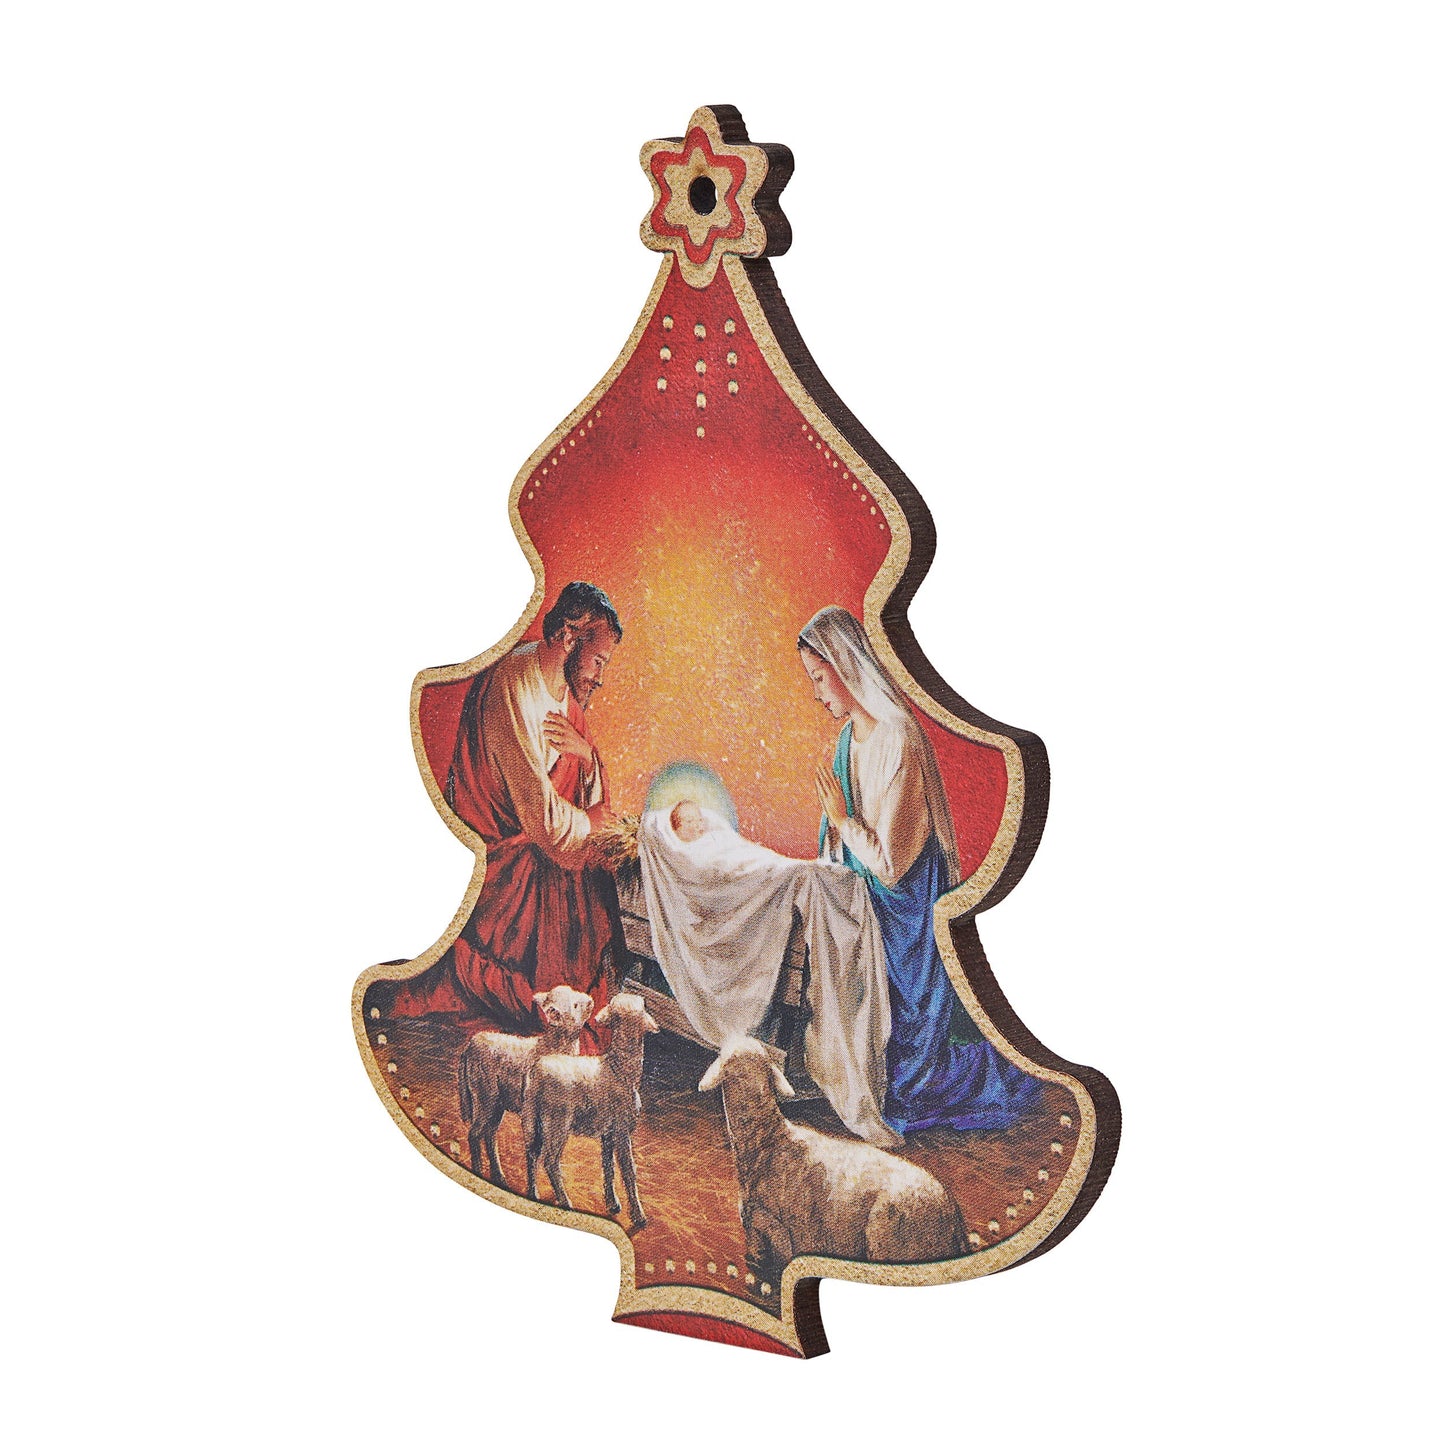 Mondo Cattolico 11 cm (4.33 in) Red Christmas Tree-shaped Christmas Decoration With Nativity Scene